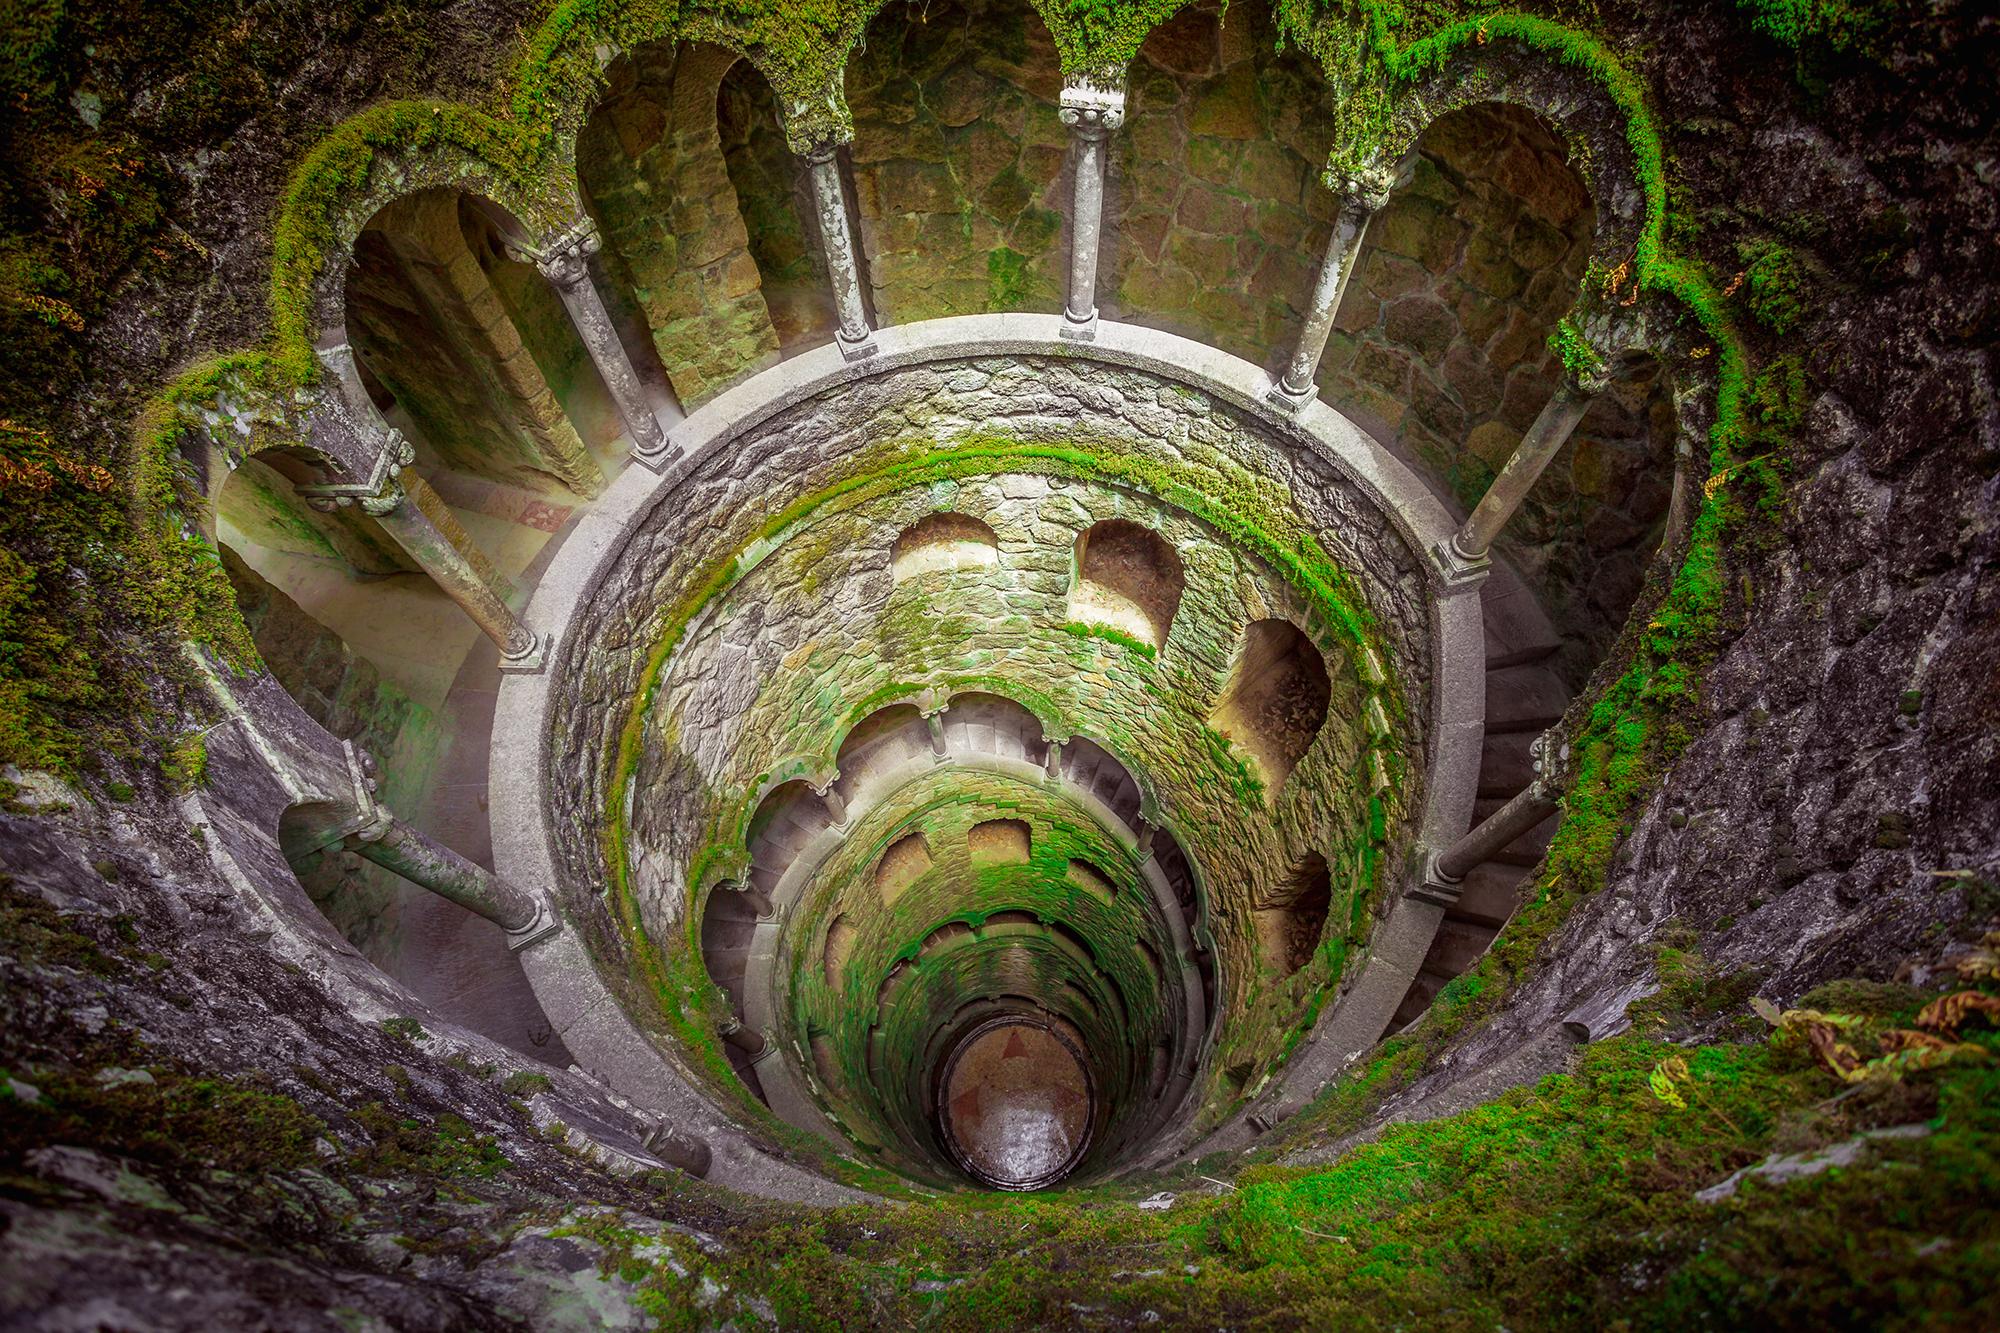 The tunnels leading from Quinta da Regaleira's initiation well show visitors that Sintra is loaded with wonder both above and below ground.  – © LALS STOCK / Shutterstock